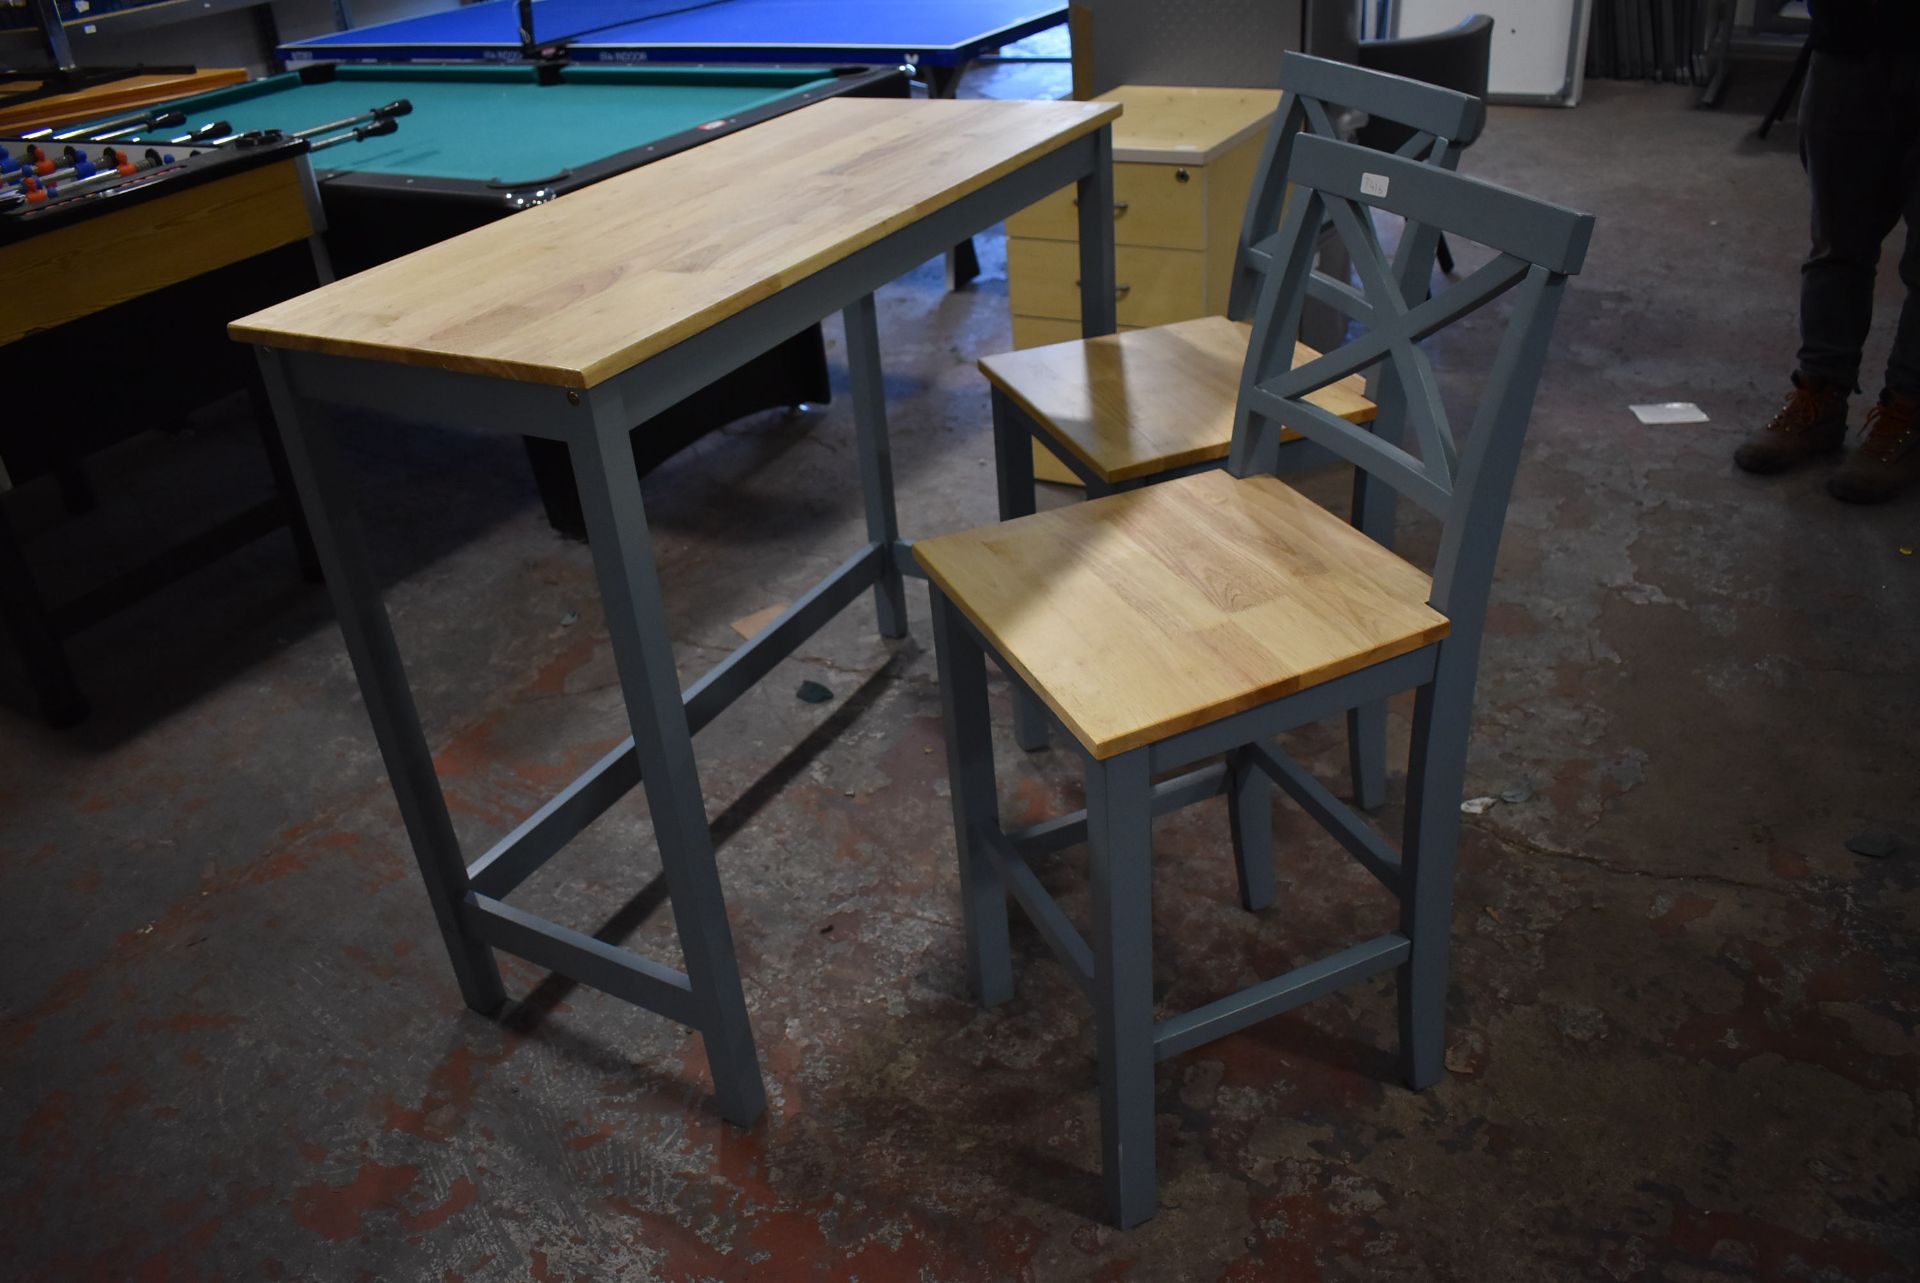 *Wooden Breakfast Bar and Two Barstools